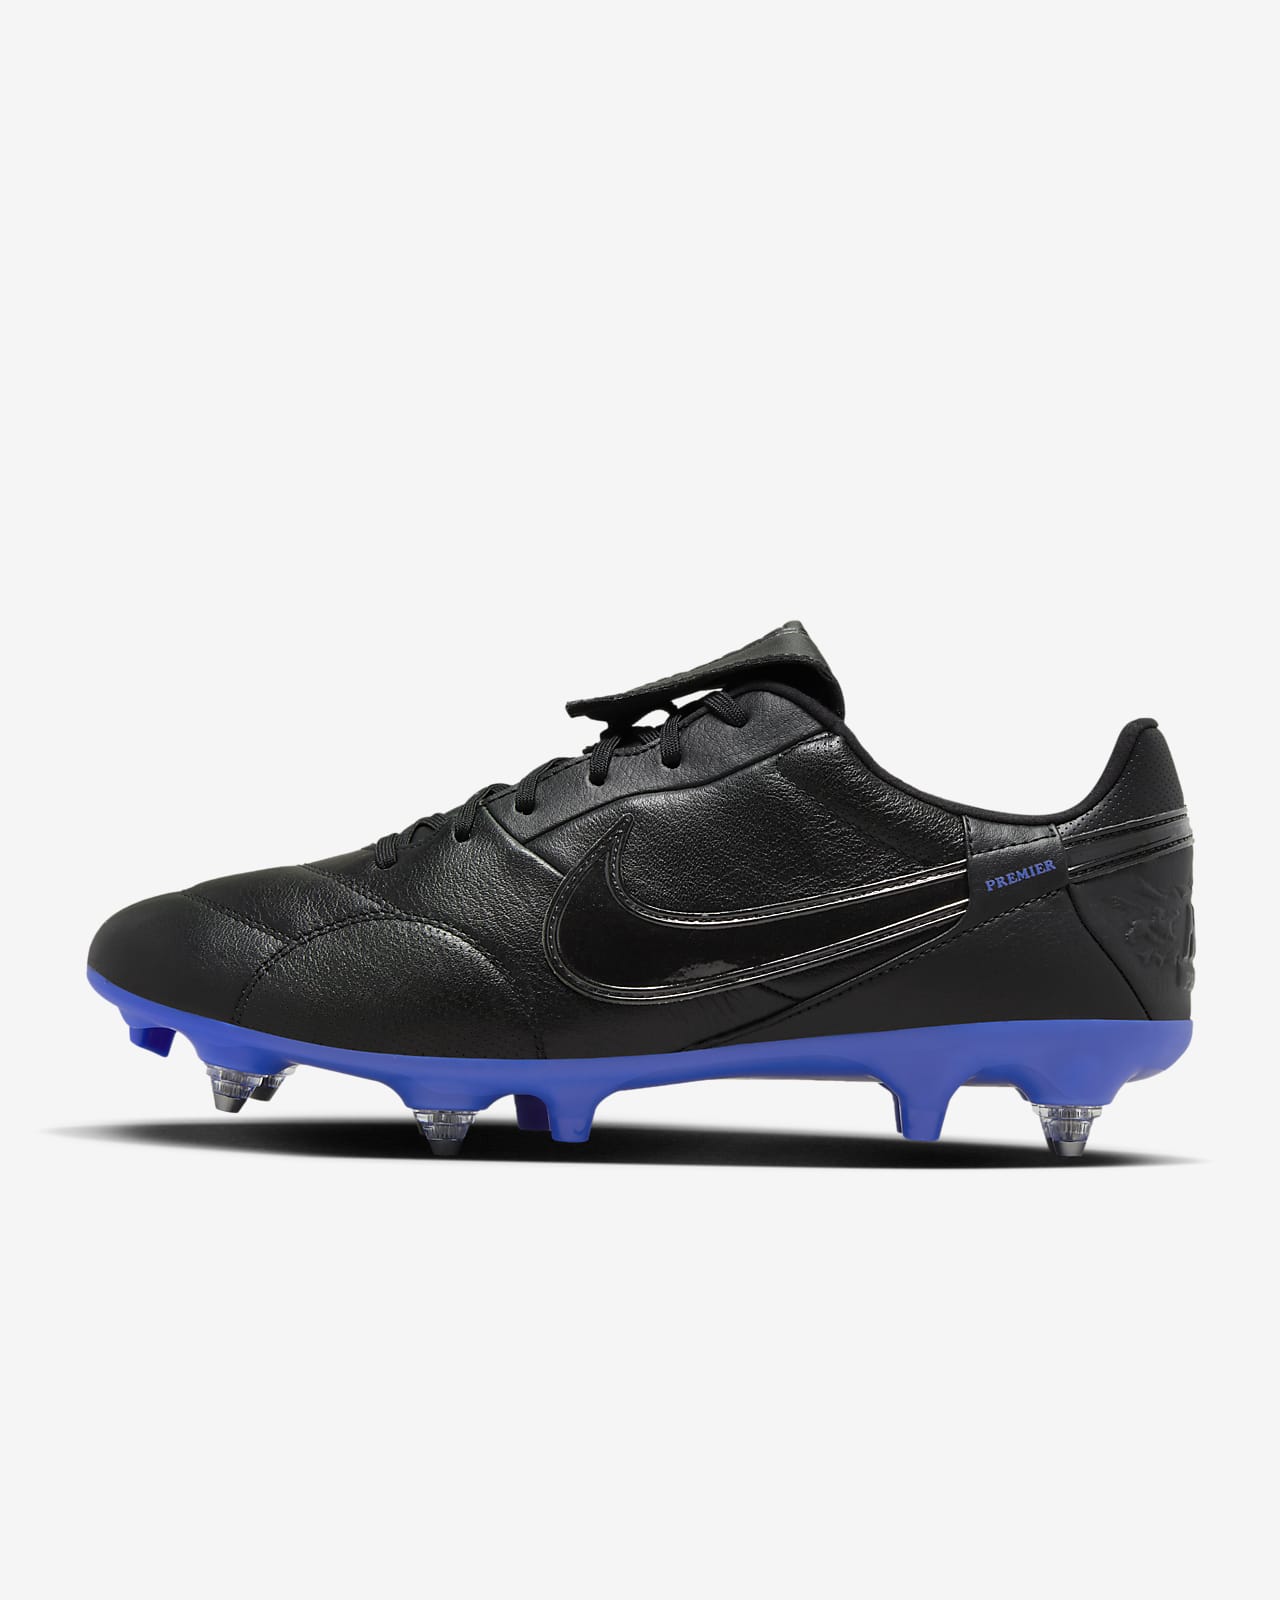 NikePremier 3 Soft-Ground Low-Top Football Boot